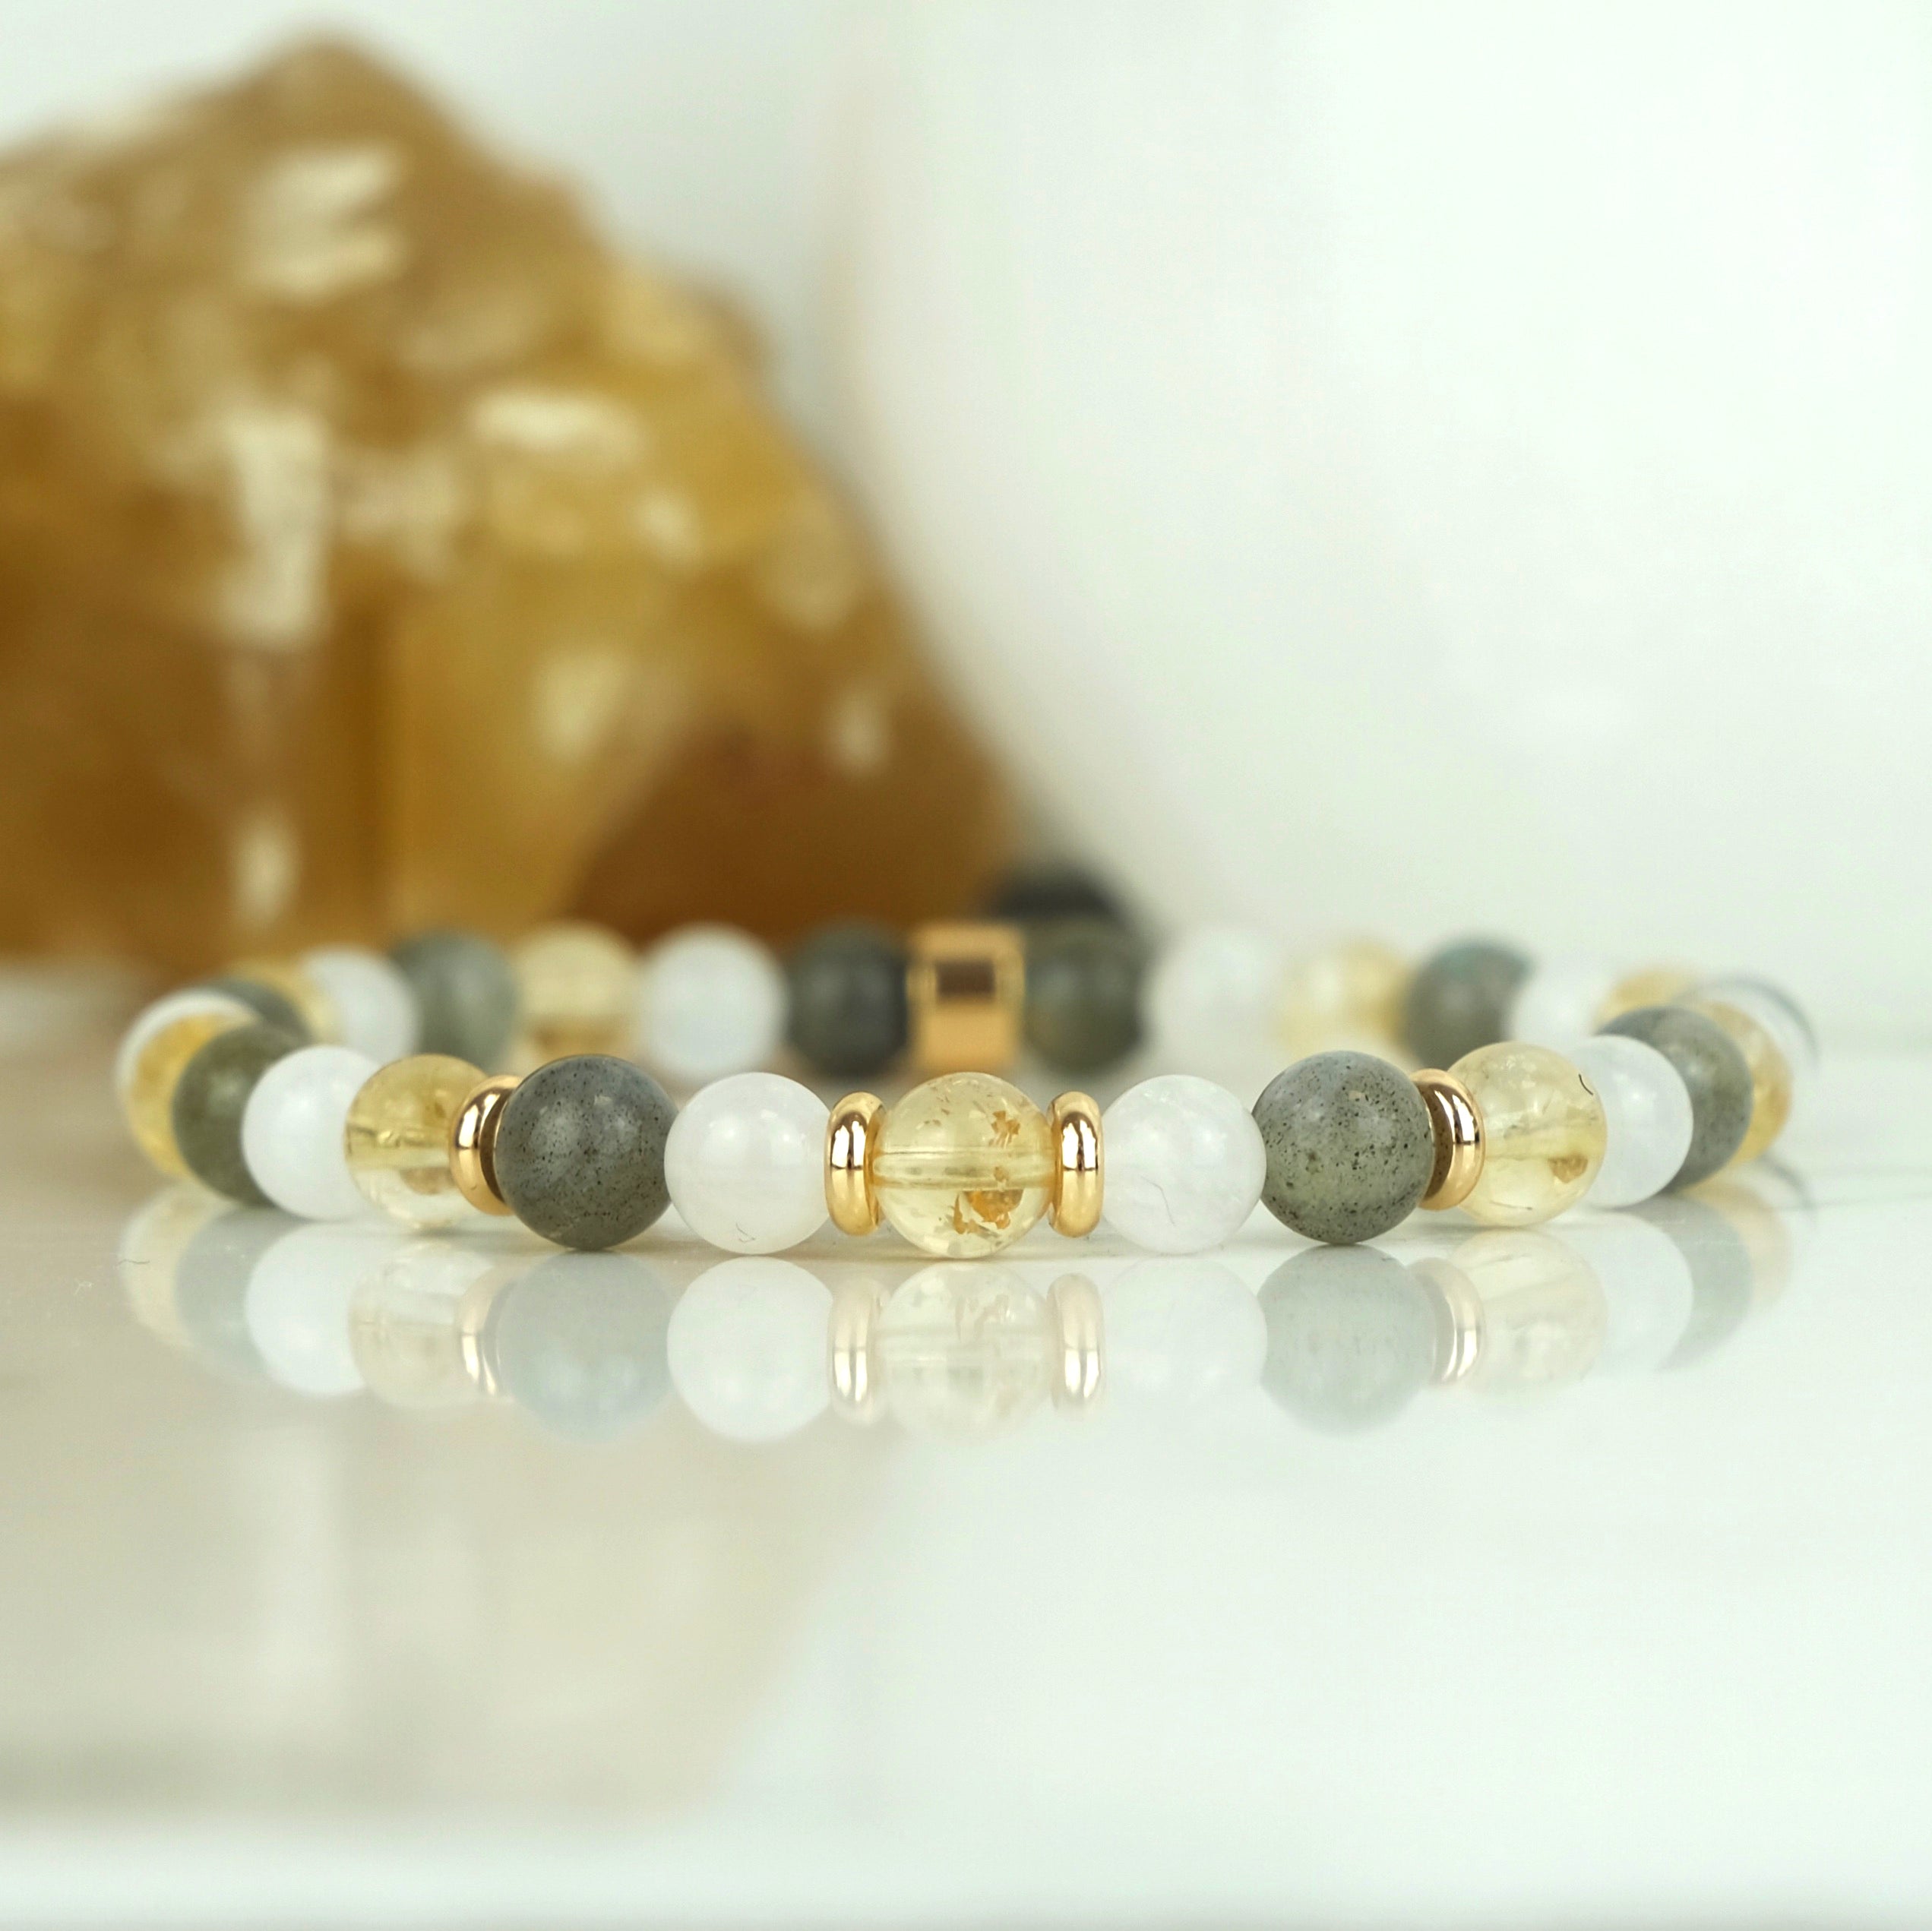 A citrine, labradorite and moonstone gemstone bracelet in 6mm beads with gold accessories